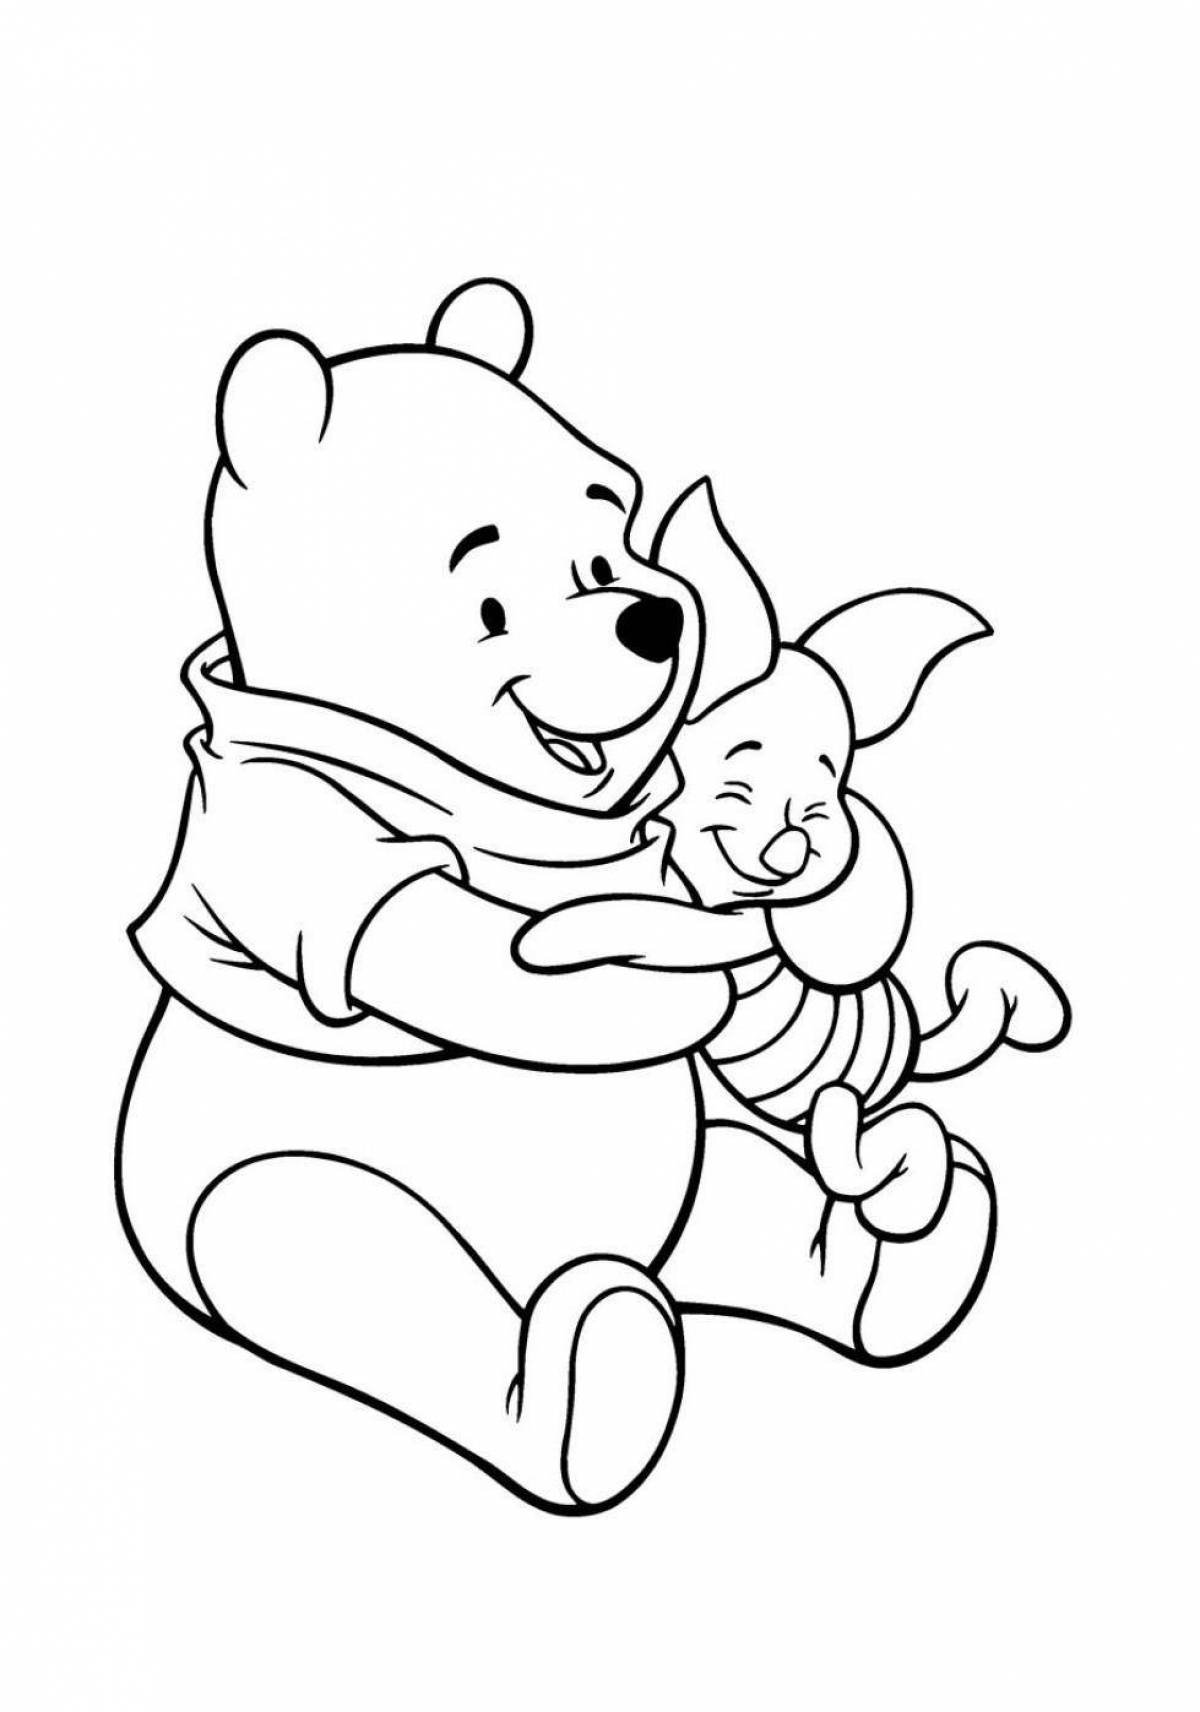 Coloring page charming winnie the pooh